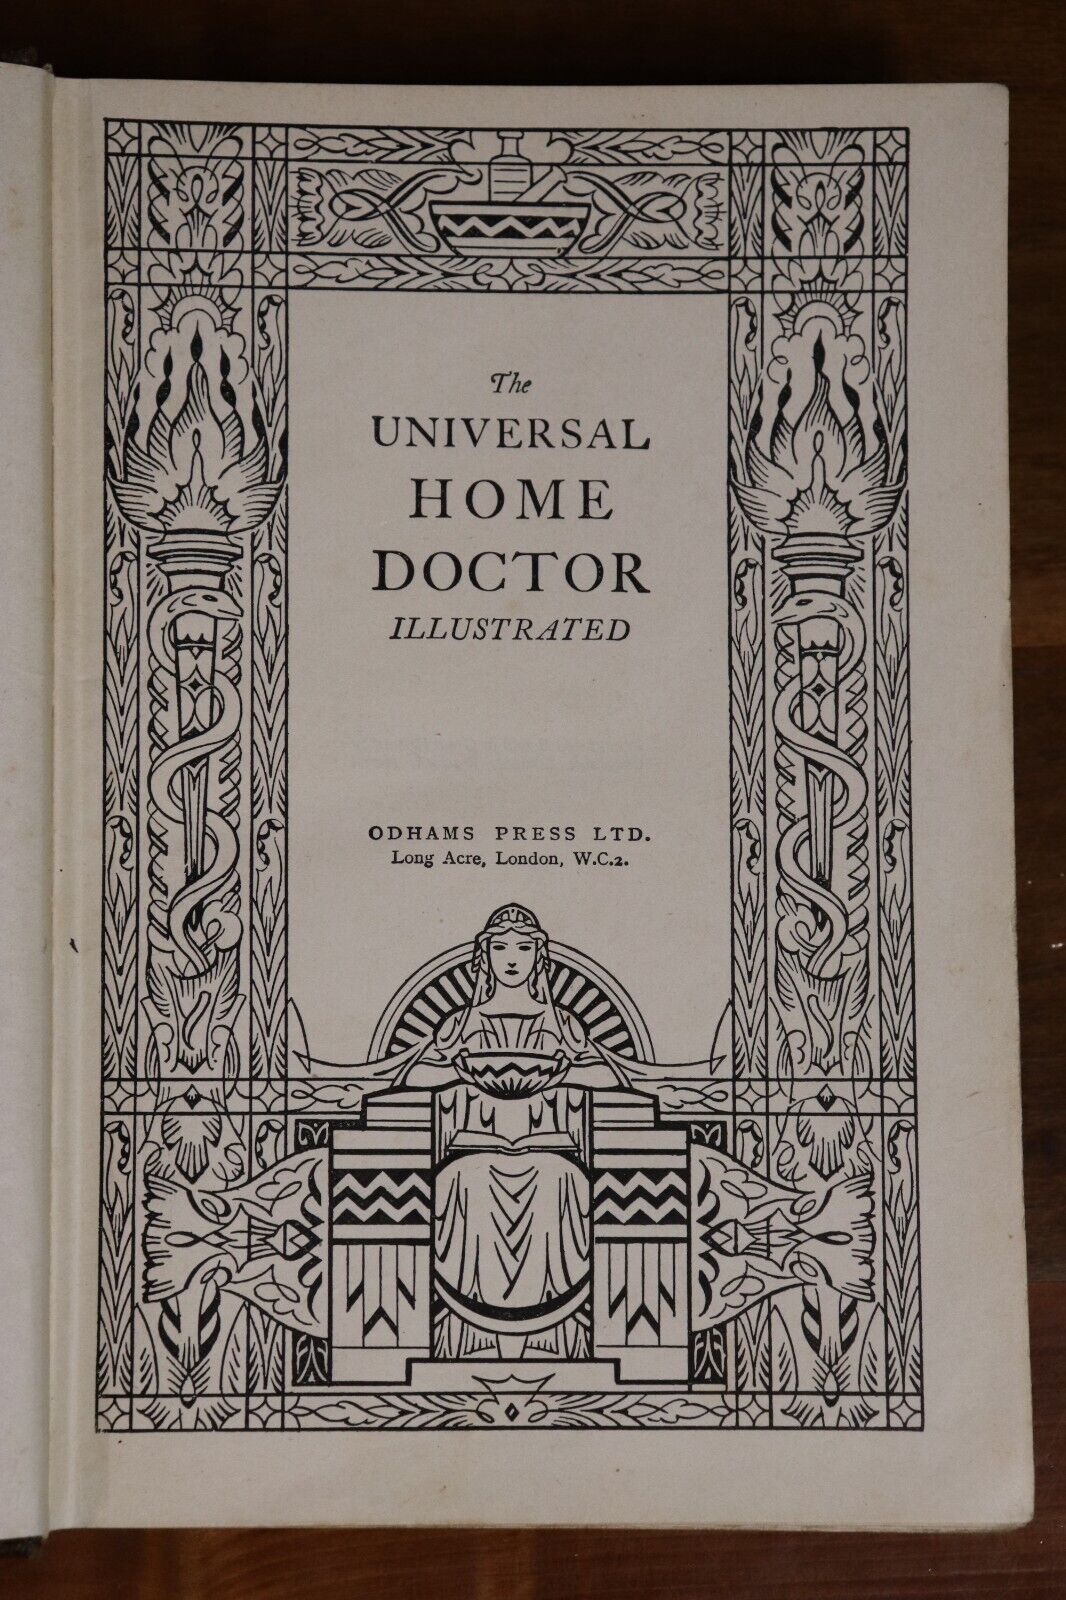 The Universal Home Doctor Illustrated - c1950 - Vintage Medical Reference Book - 0